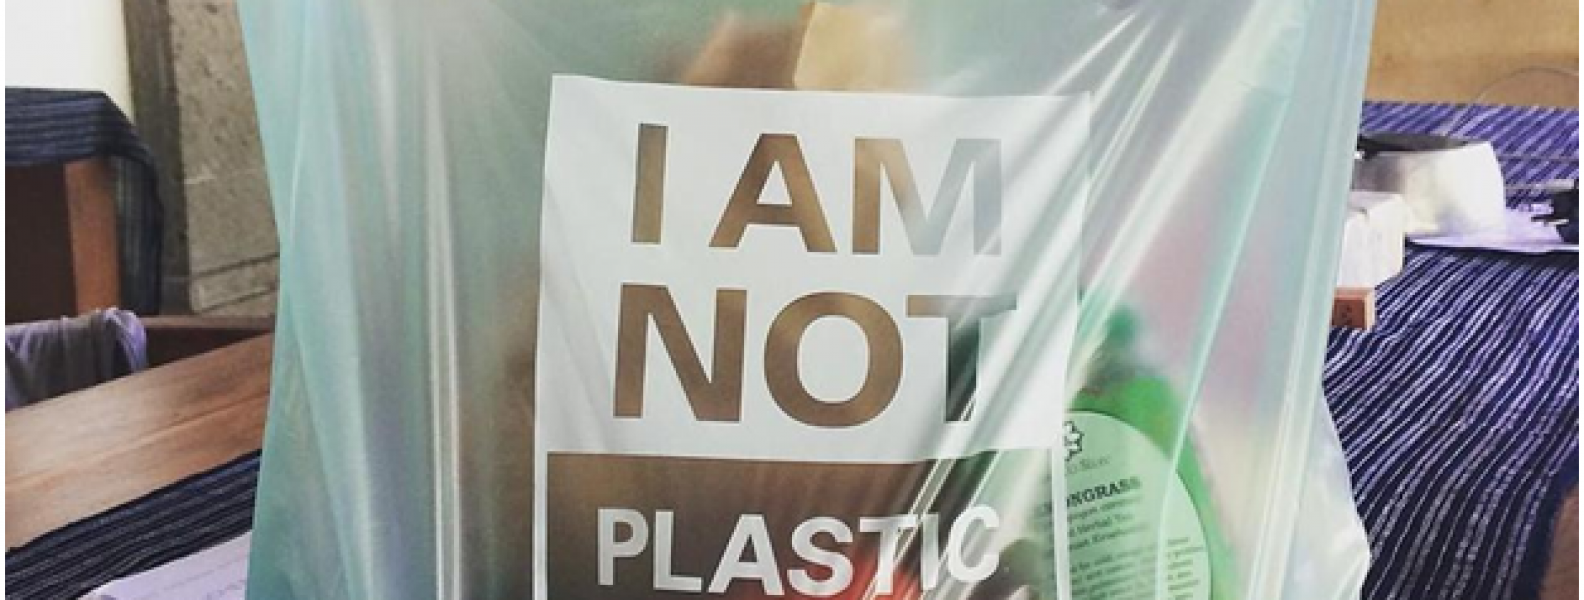 Plastic Bags Should Be Banned…Or Not? – Bethesda Green